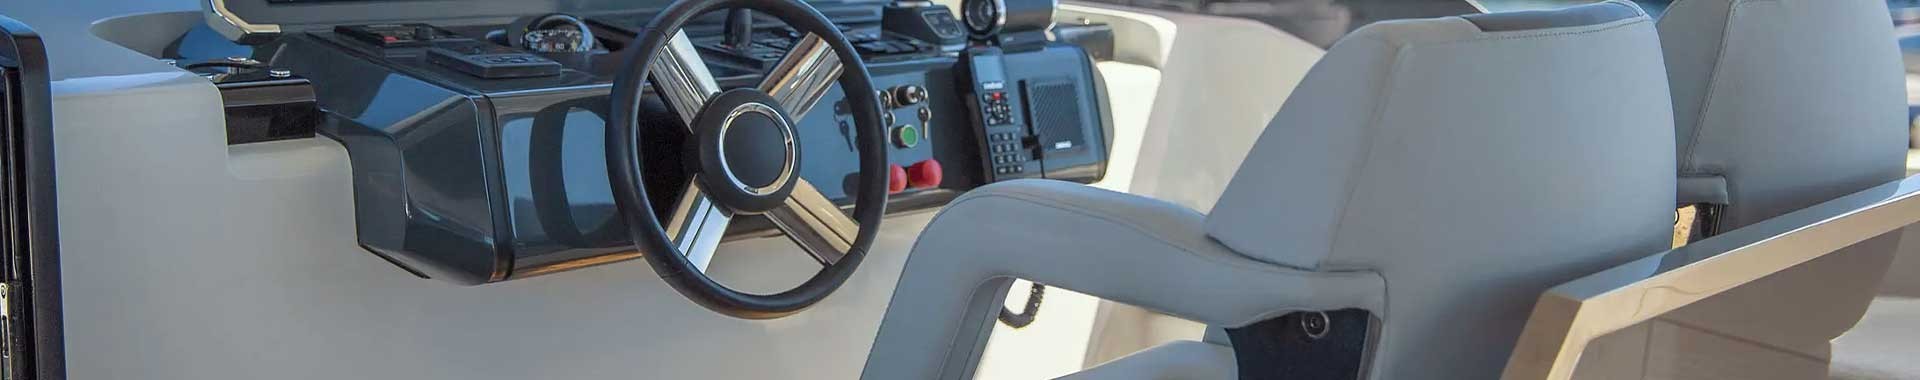 Boat seats and accessories